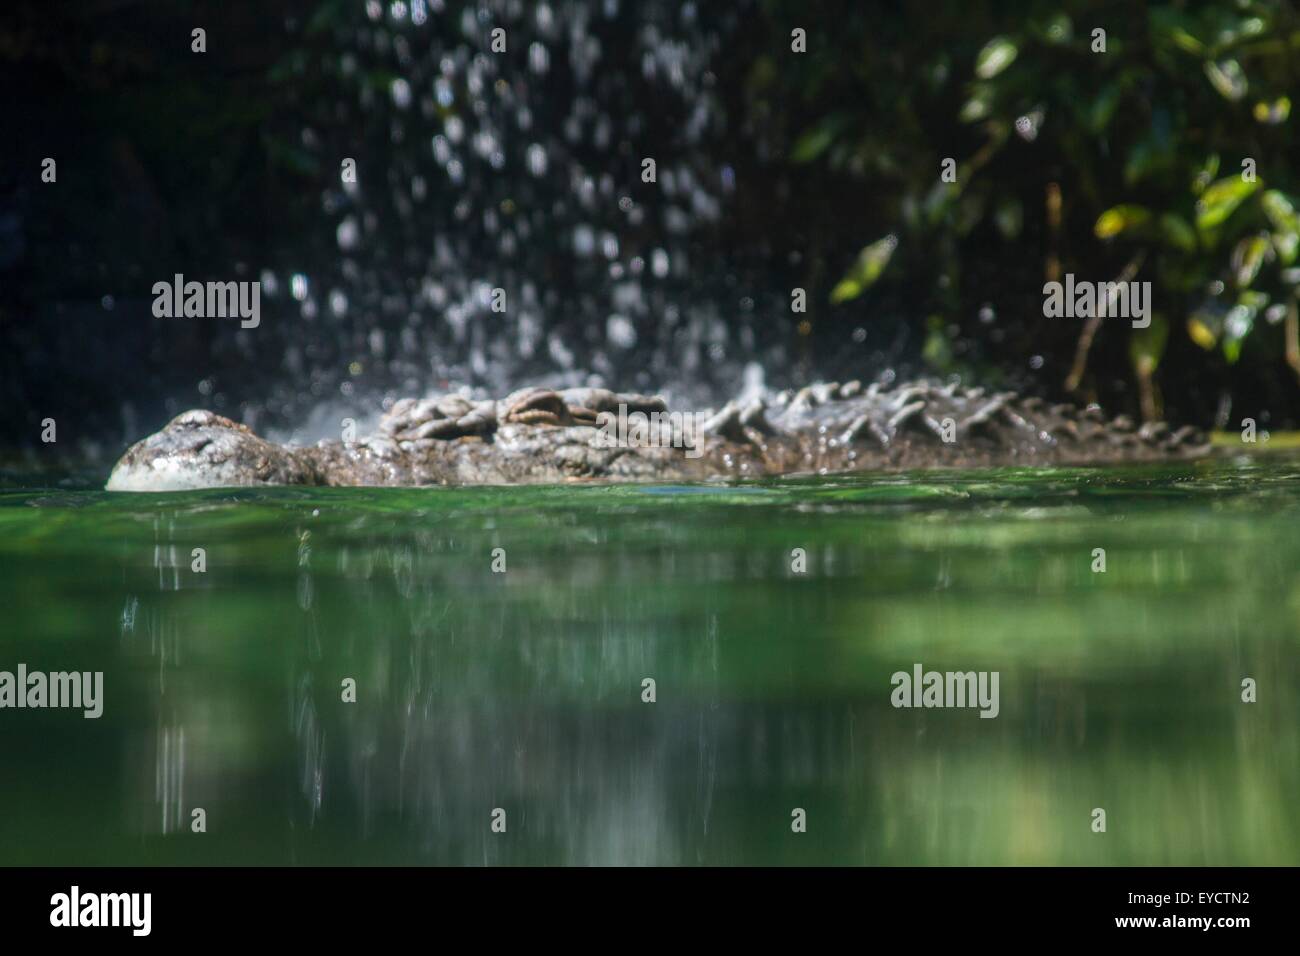 Saltwater crocodile in water, surface level view Stock Photo